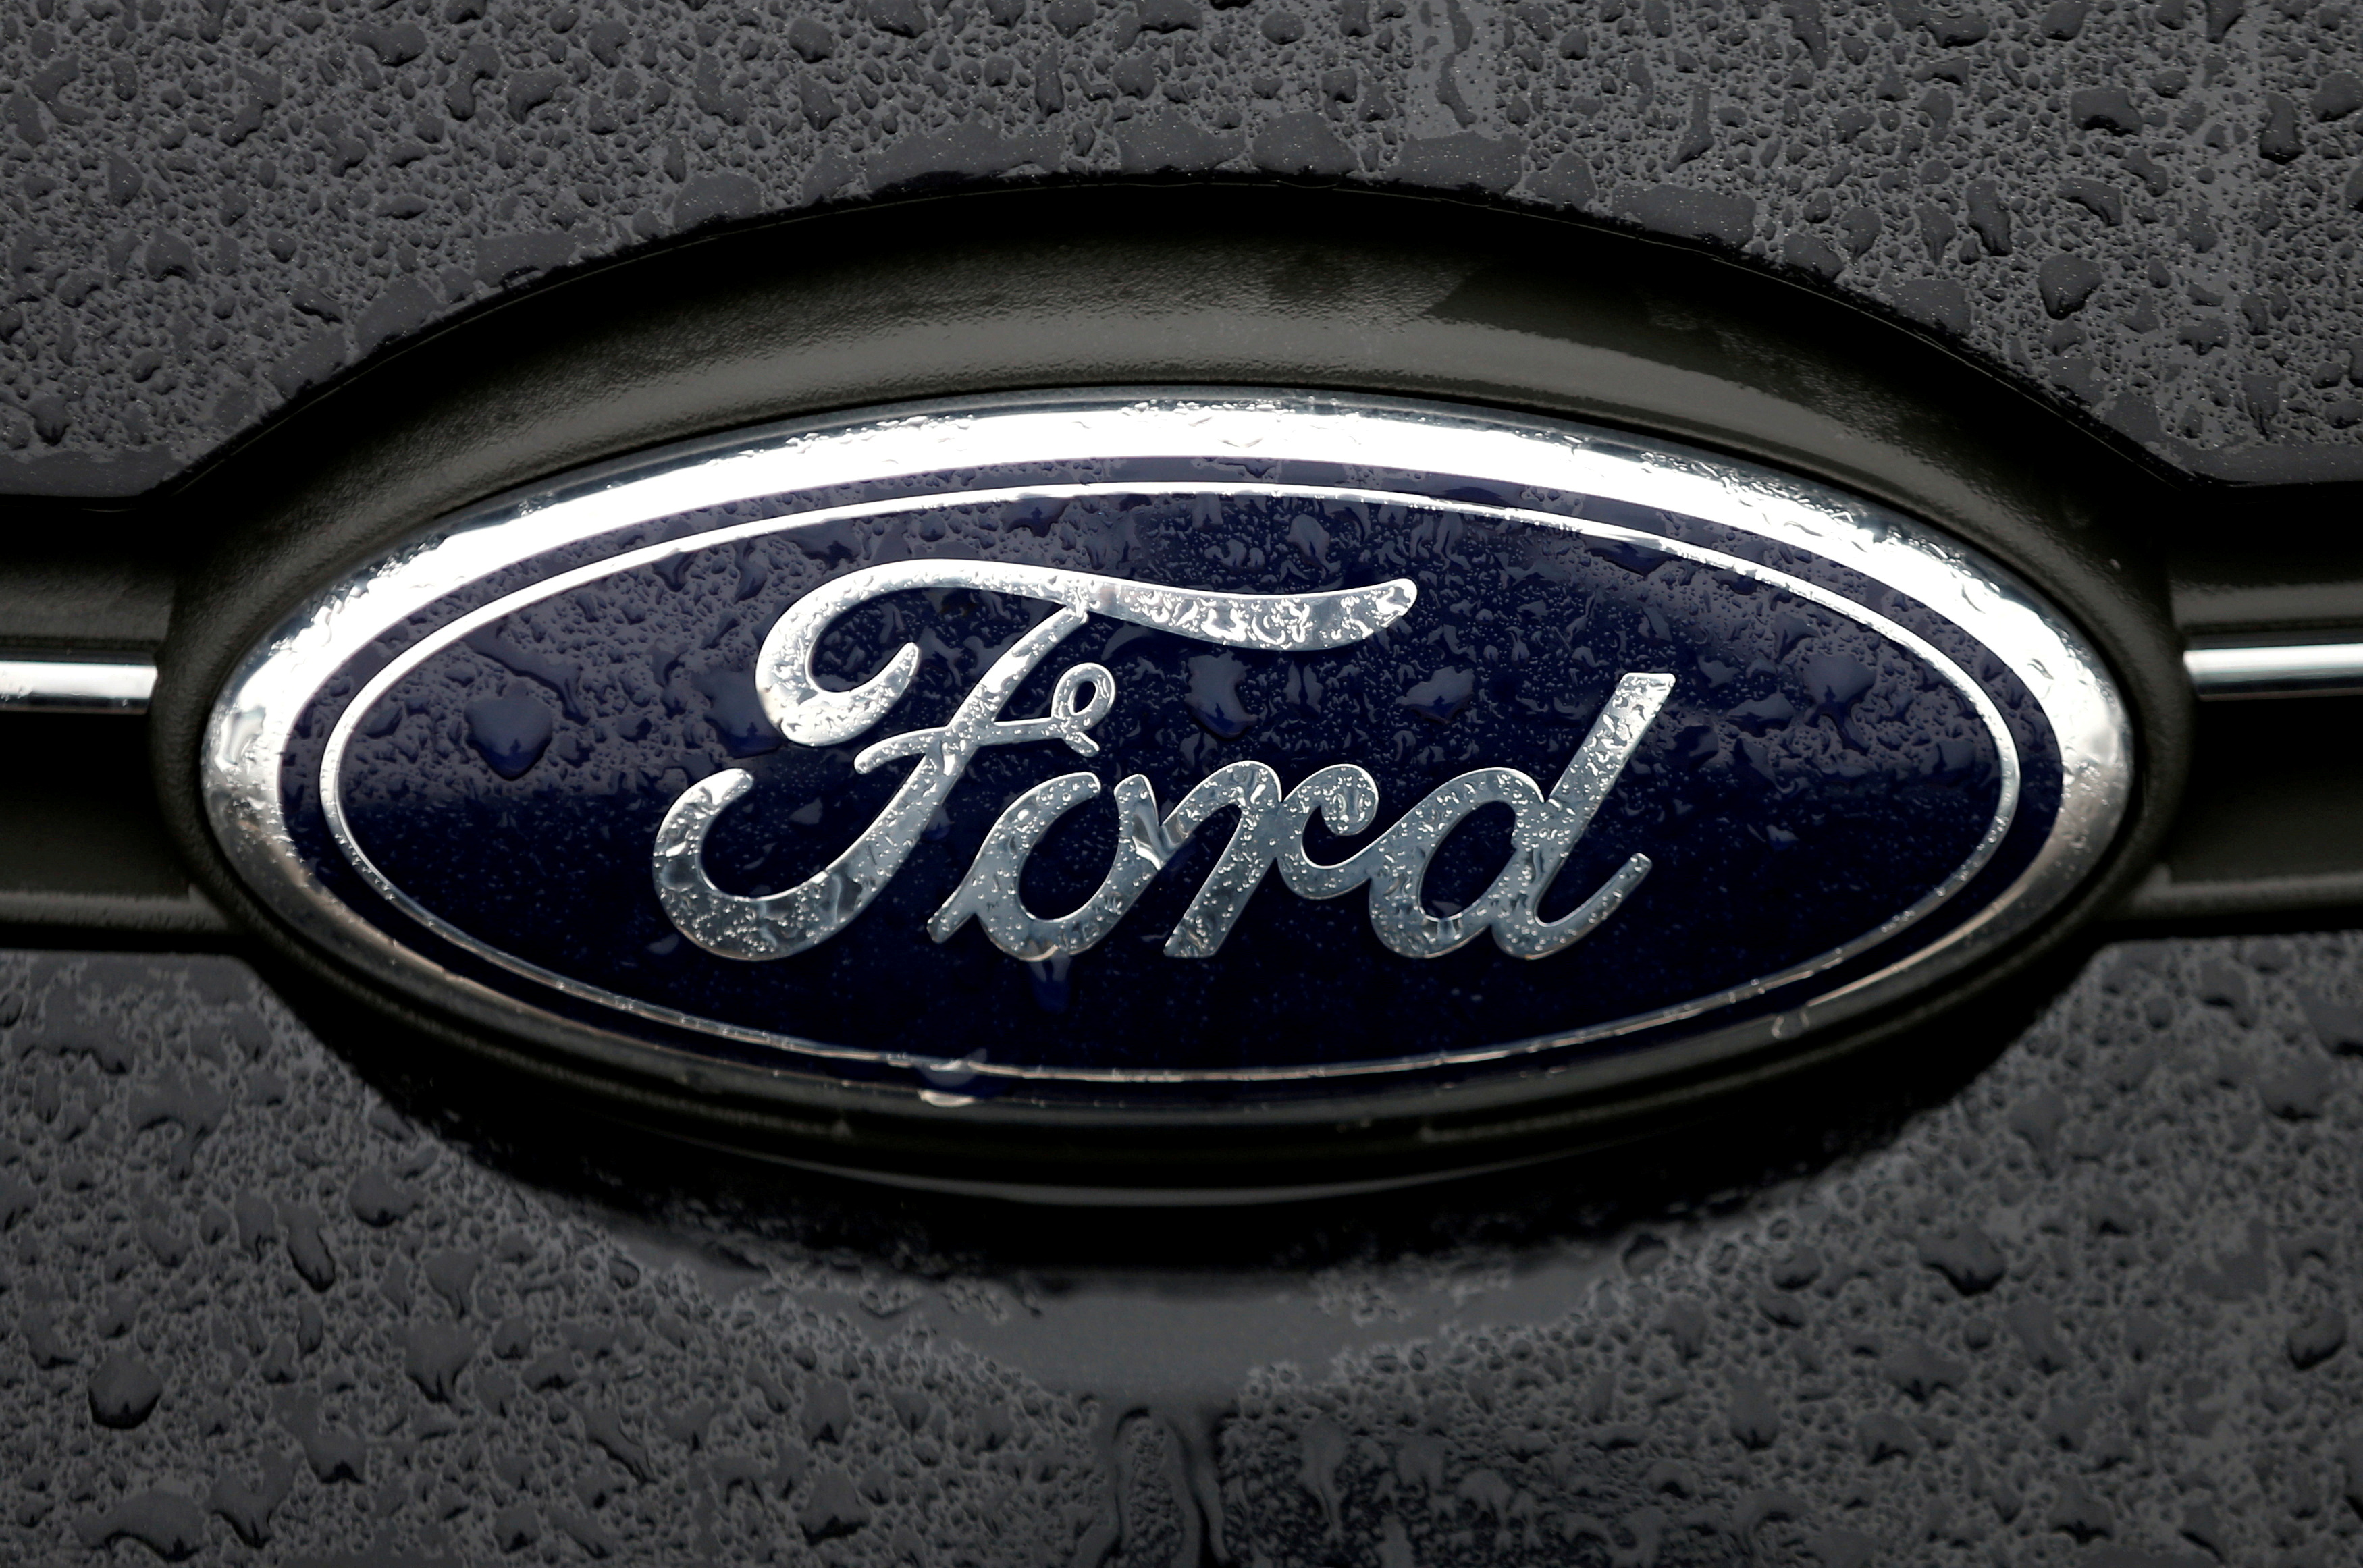 Pictured: Ford logo on a vehicle